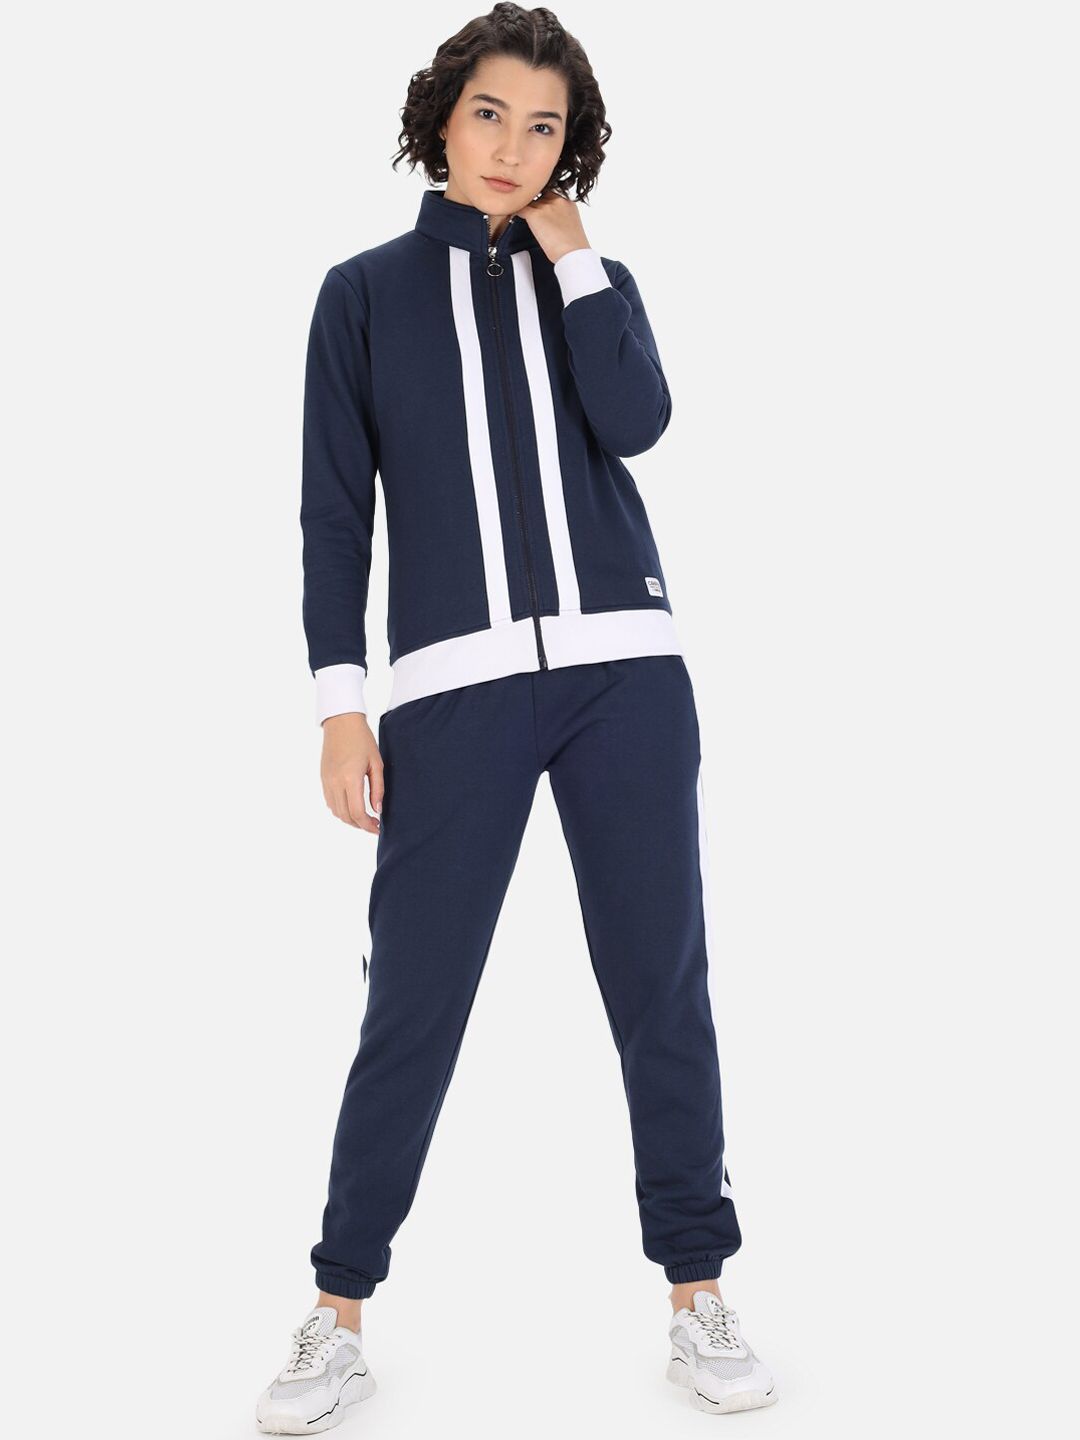 GRIFFEL Women Navy Blue & White Colourblocked Cotton Tracksuit Price in India